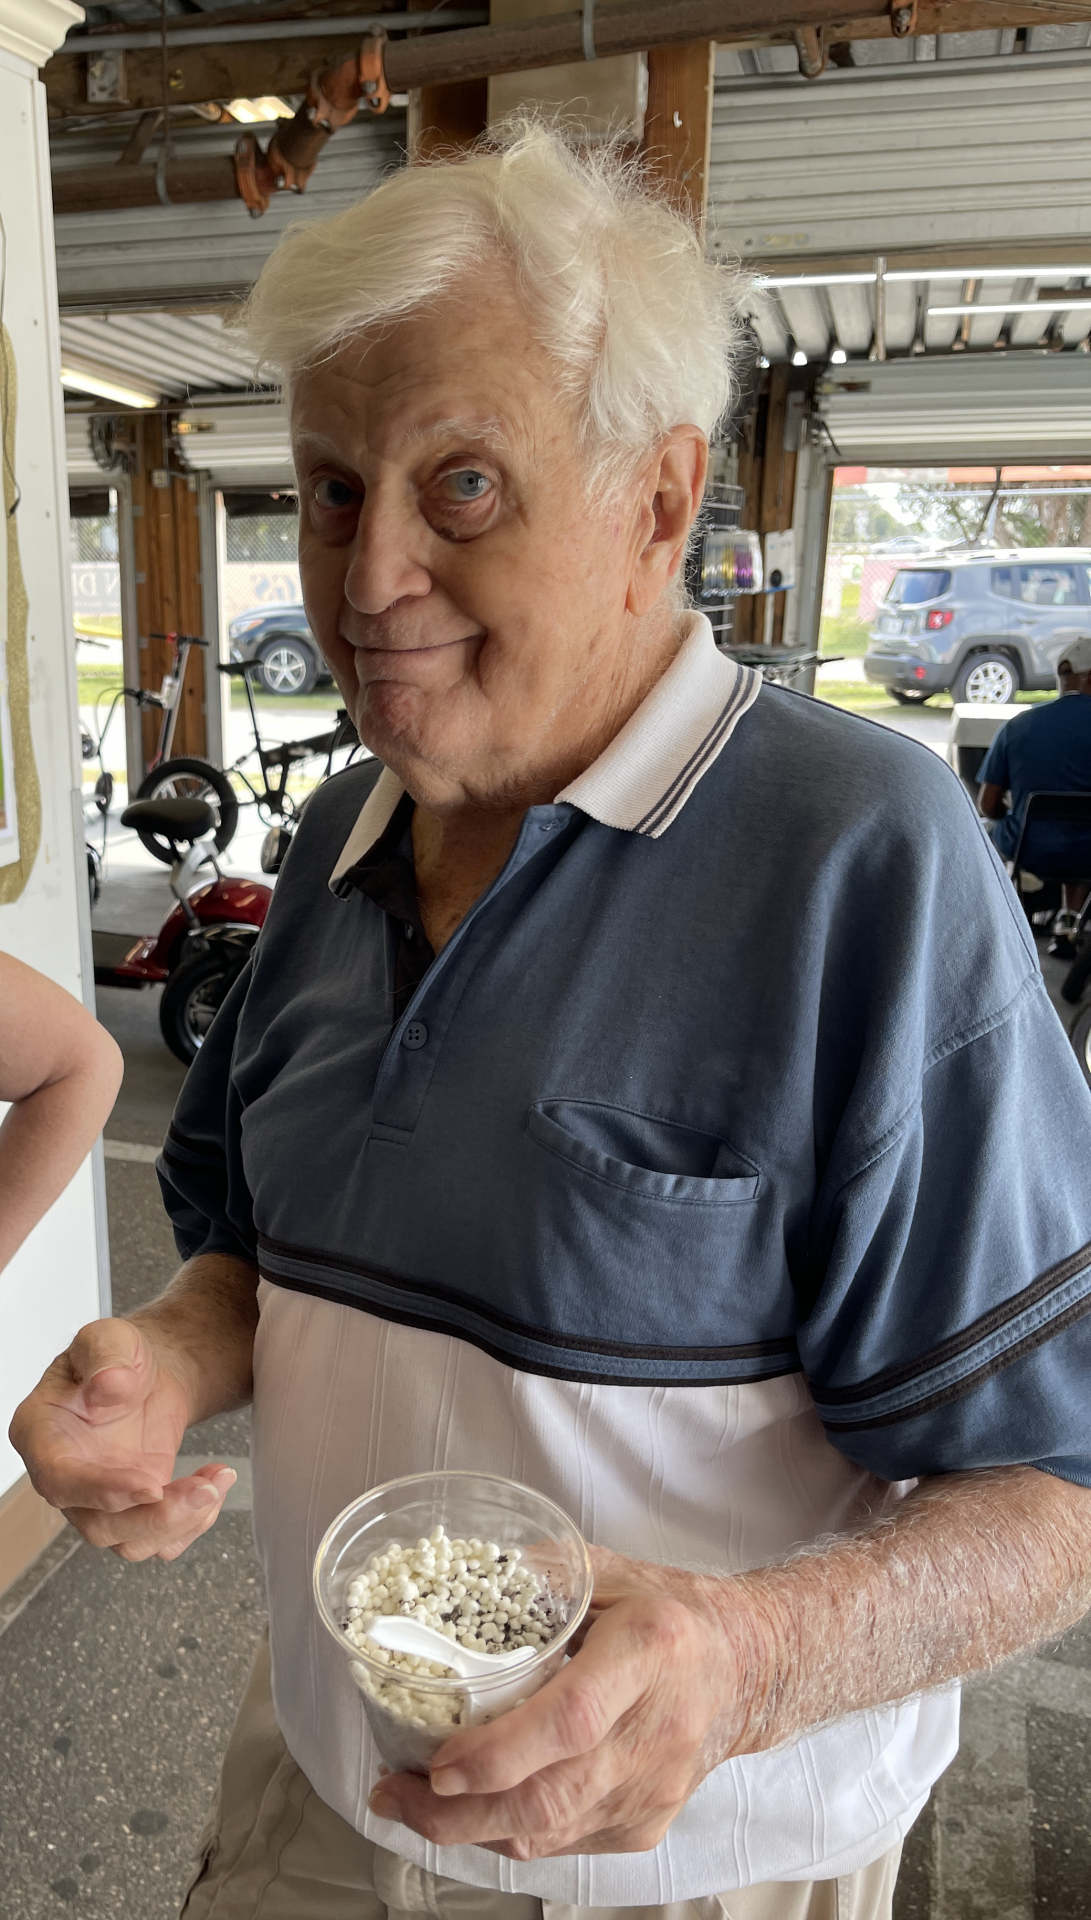 Even at 86 at the flea market (a place he liked to shop at) in December he tried dip n dots for the very first time.  We sure enjoyed the character and love you shared with all of us.  How you cared about Godly aspects of life and those around him.  We'll miss your smiles and stories!